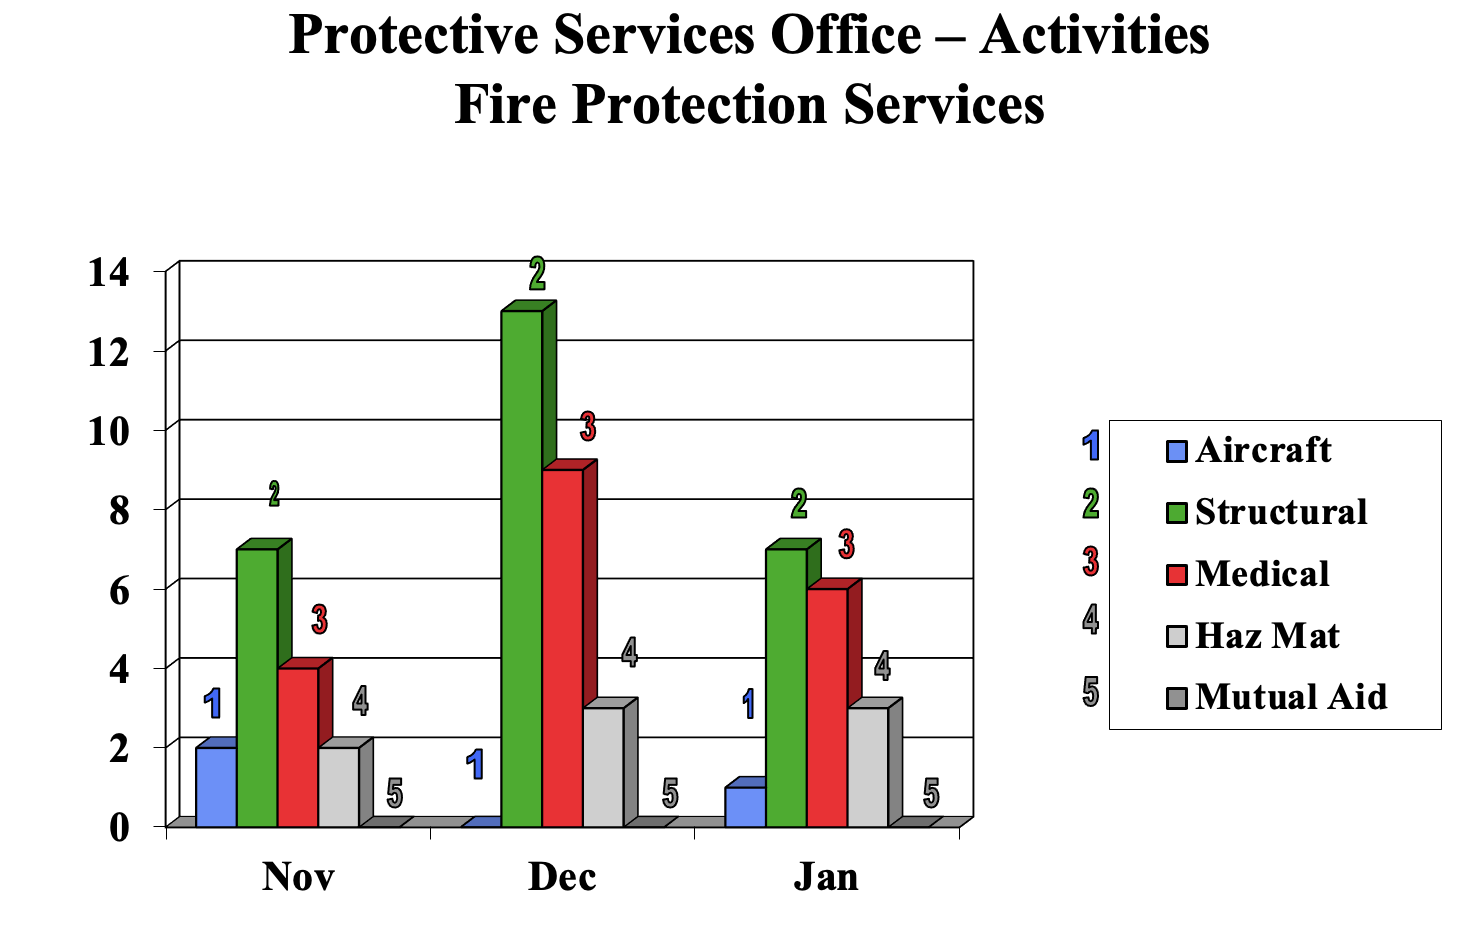 security office fire protection chart for Nov, Dec 2022 and Jan 2023